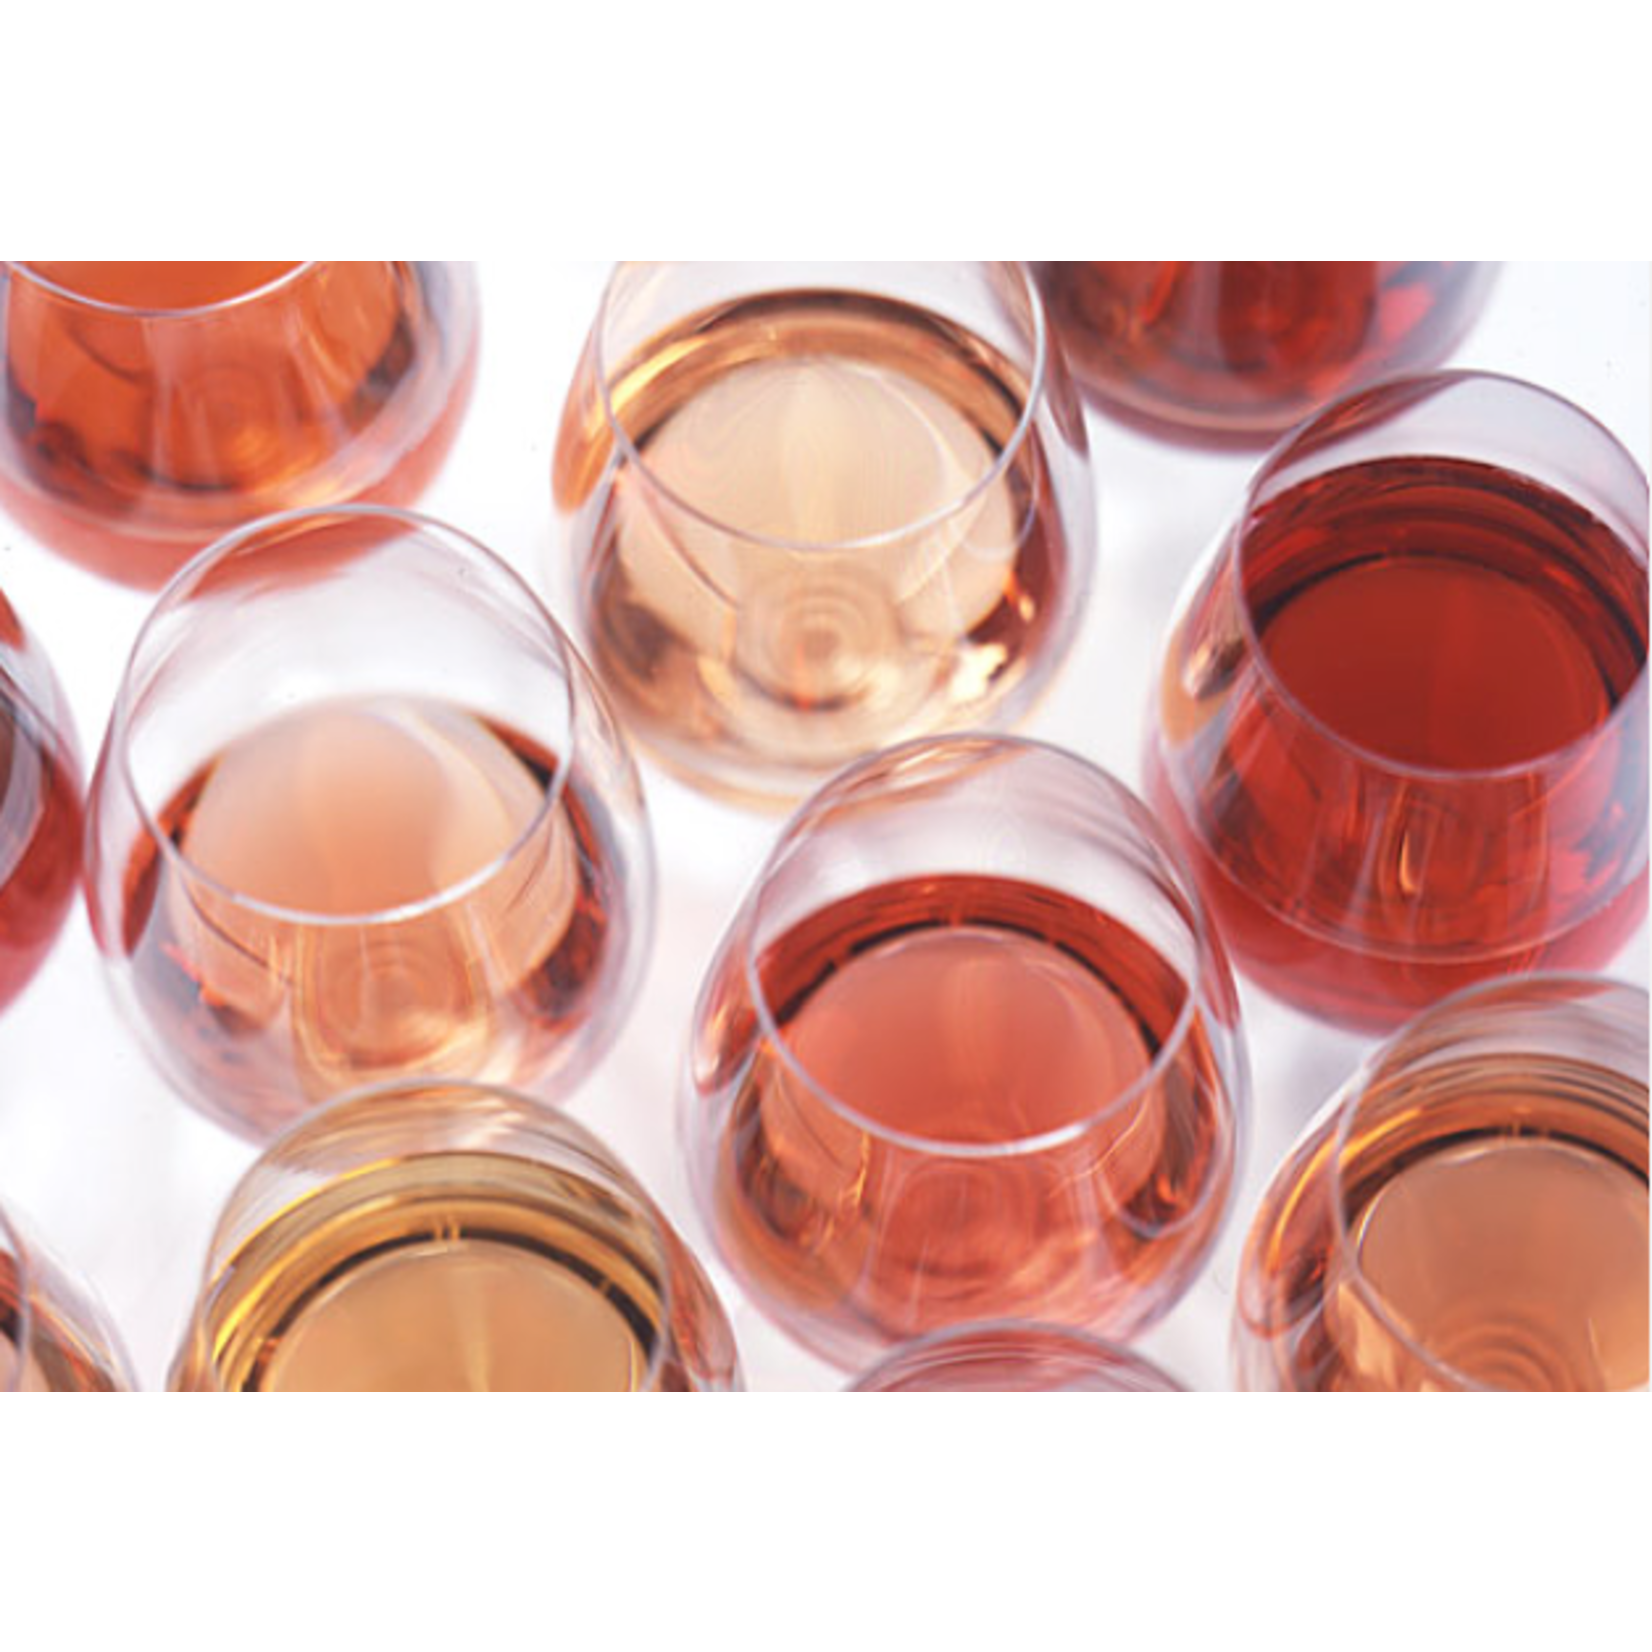 Exploring the World of Rosé, Wednesday May 15th, 6-8pm